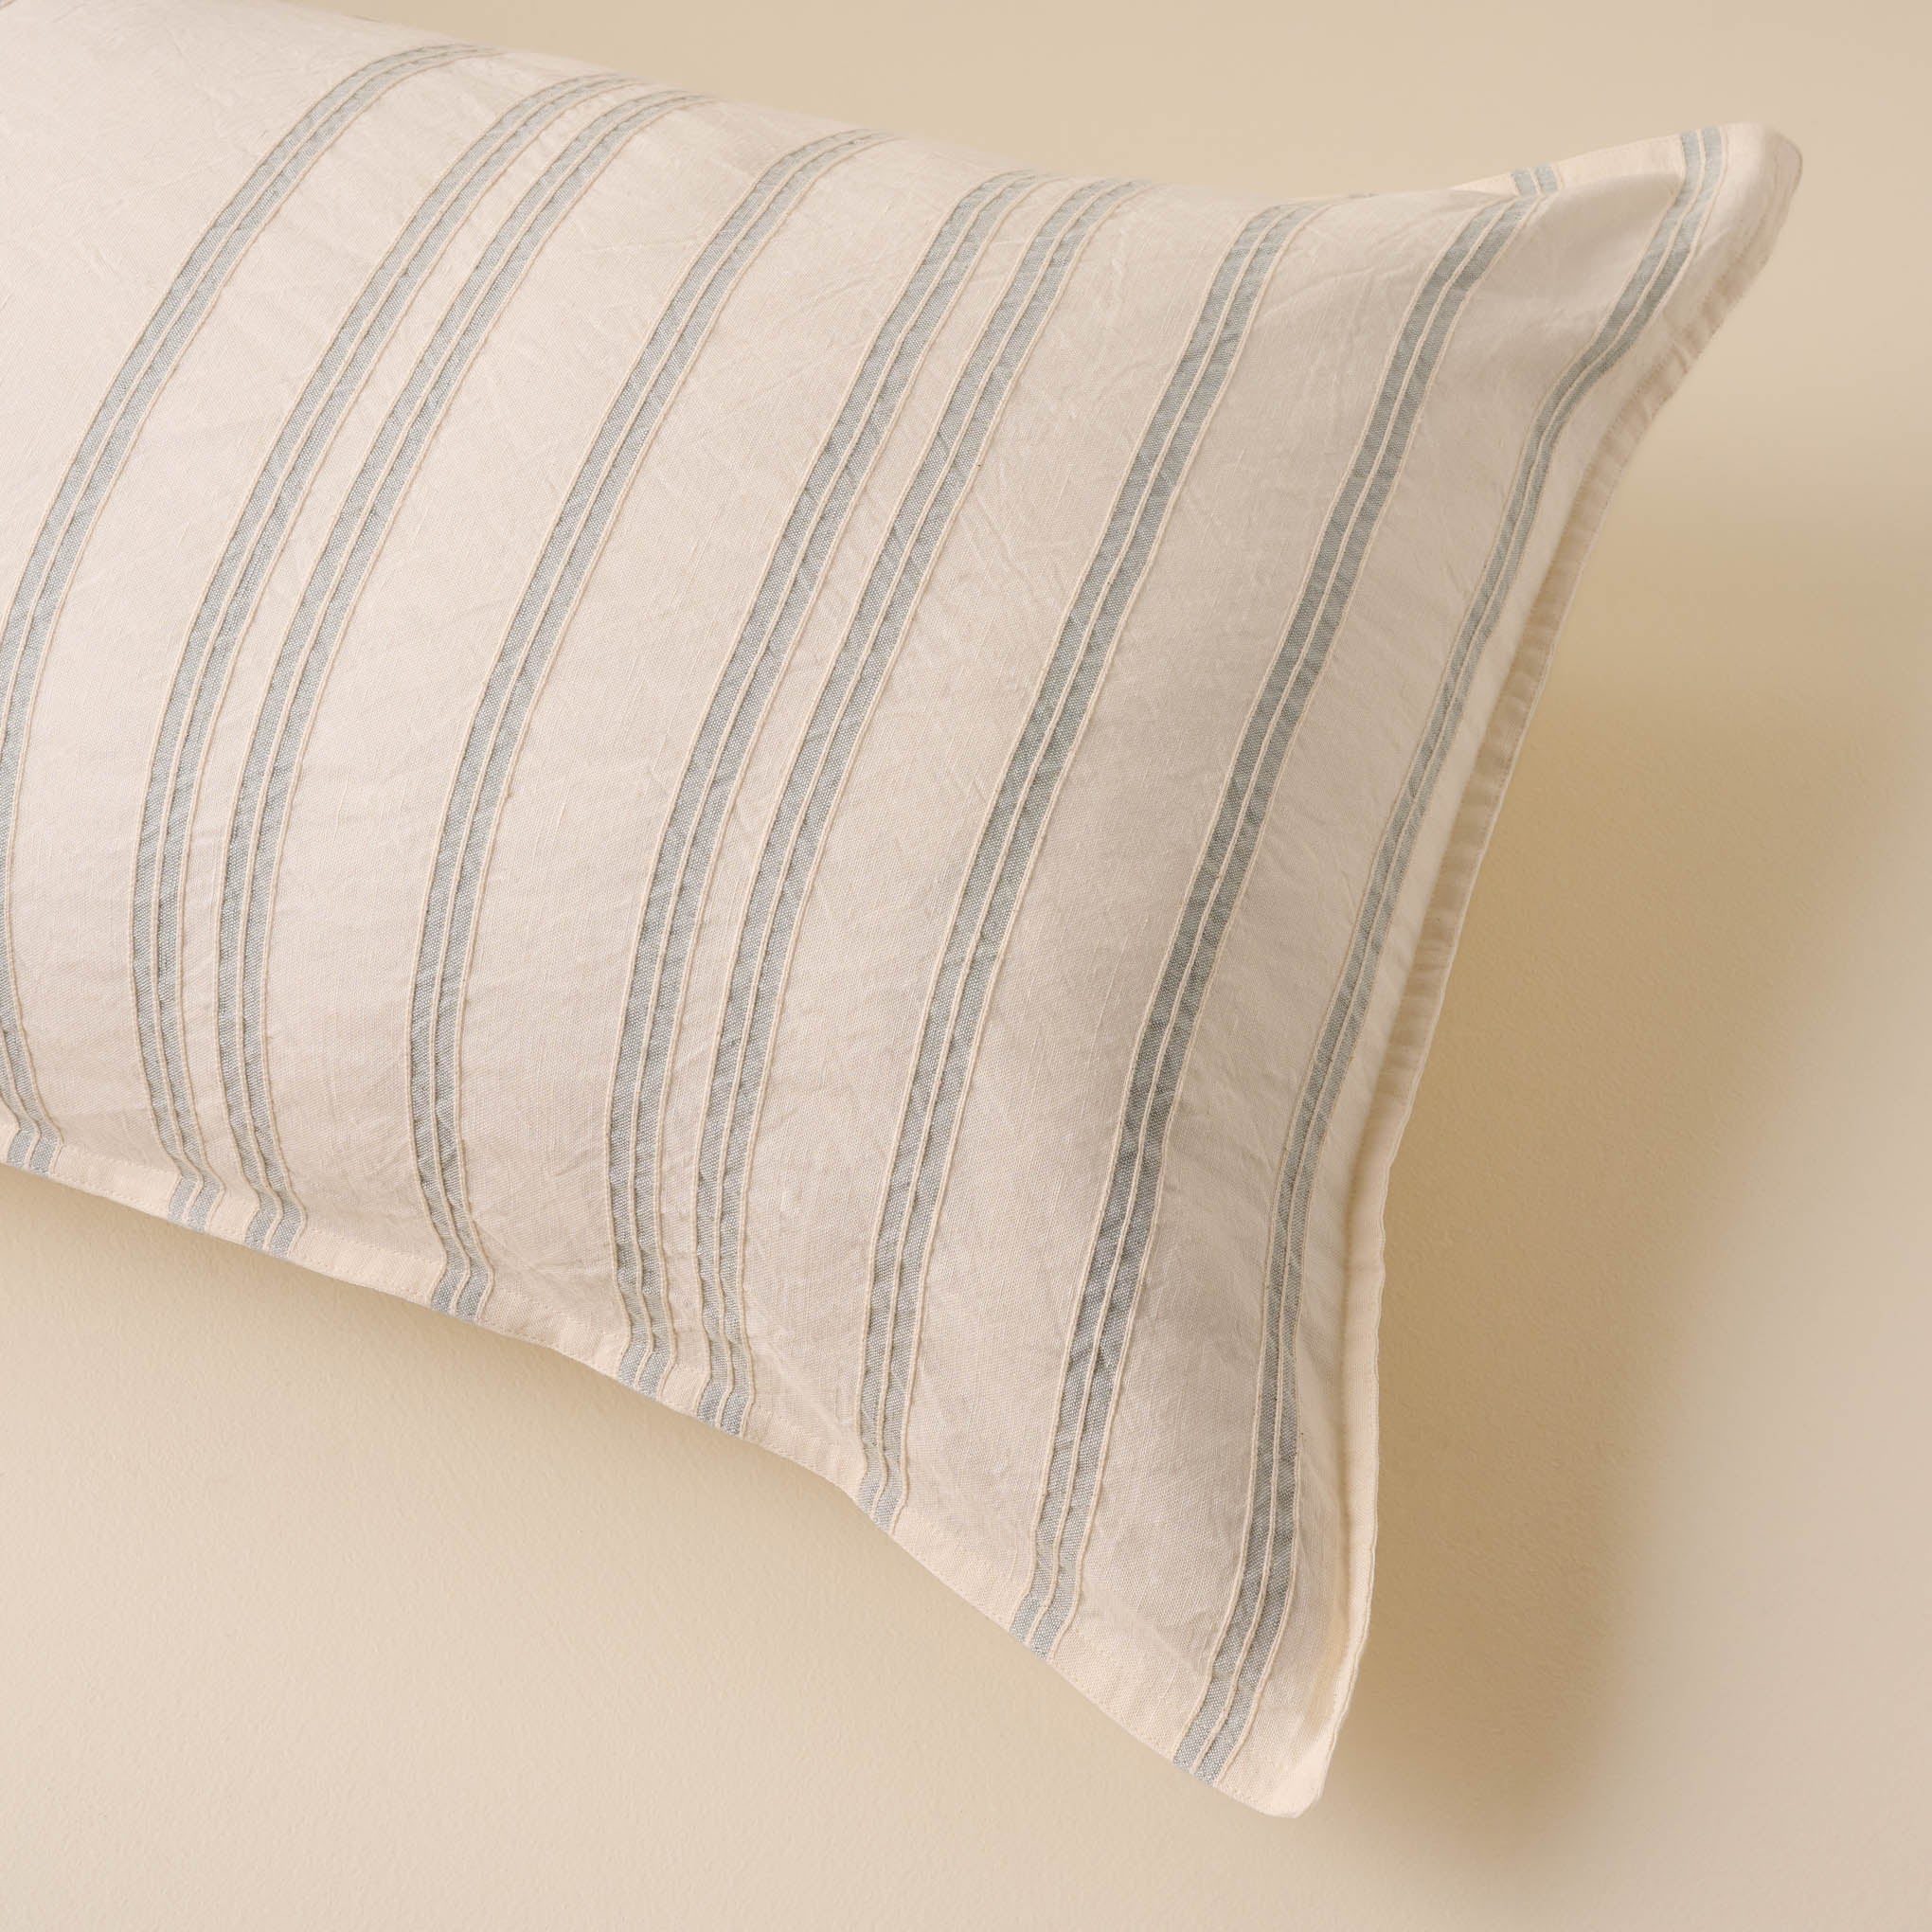 Embroidered Chambray Stripe Linen Cotton Sham On sale with items ranging from $39.20 to $47.20, discounted from $49.00 to $59.00